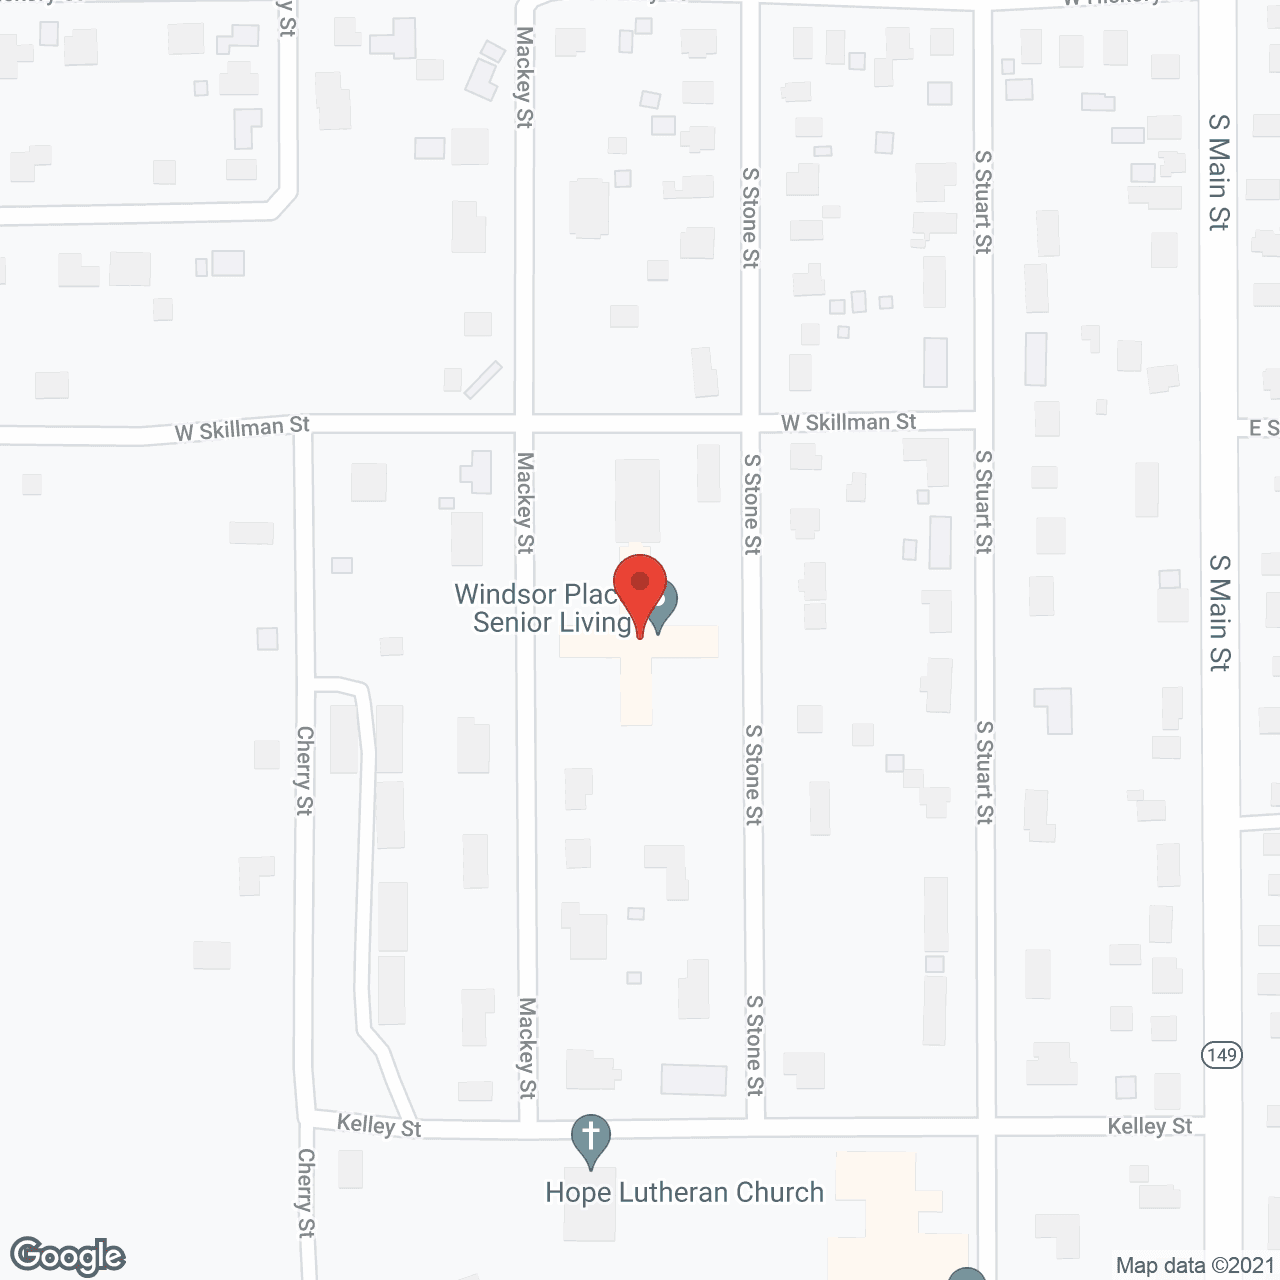 Sigourney Care Ctr in google map